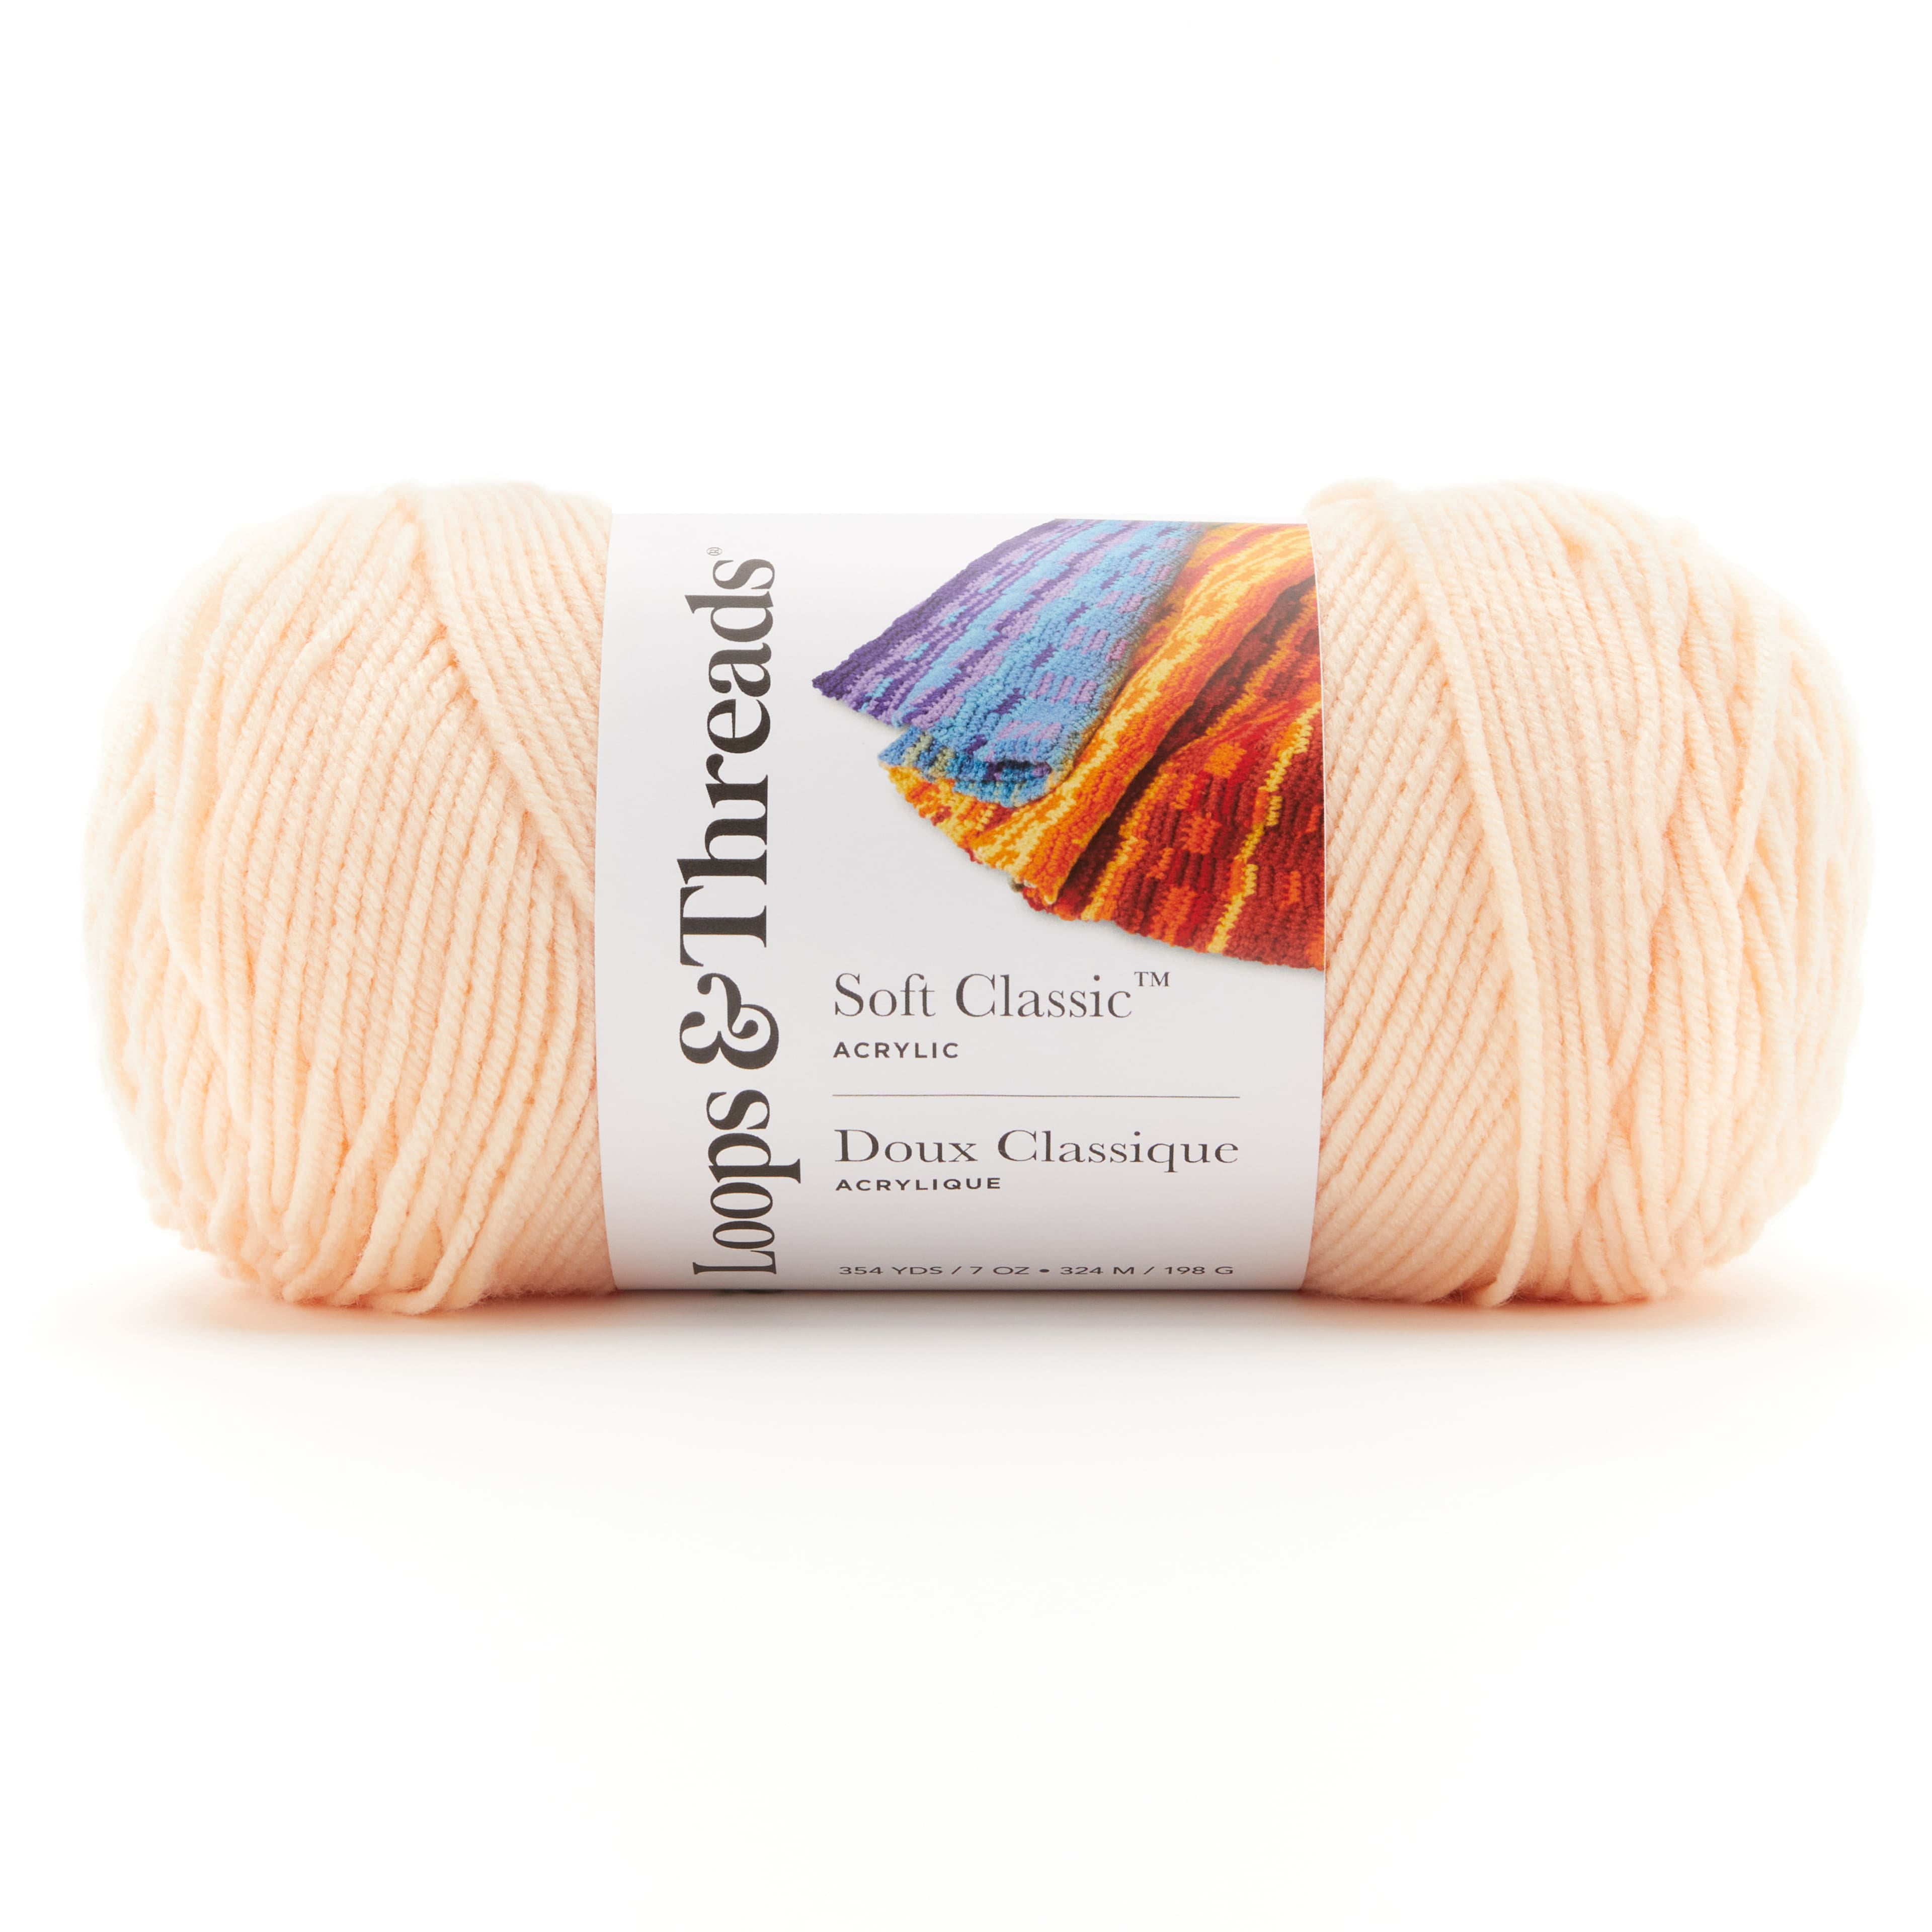 12 Pack: Value Solid Yarn by Craft Smart, Size: 7, Beige